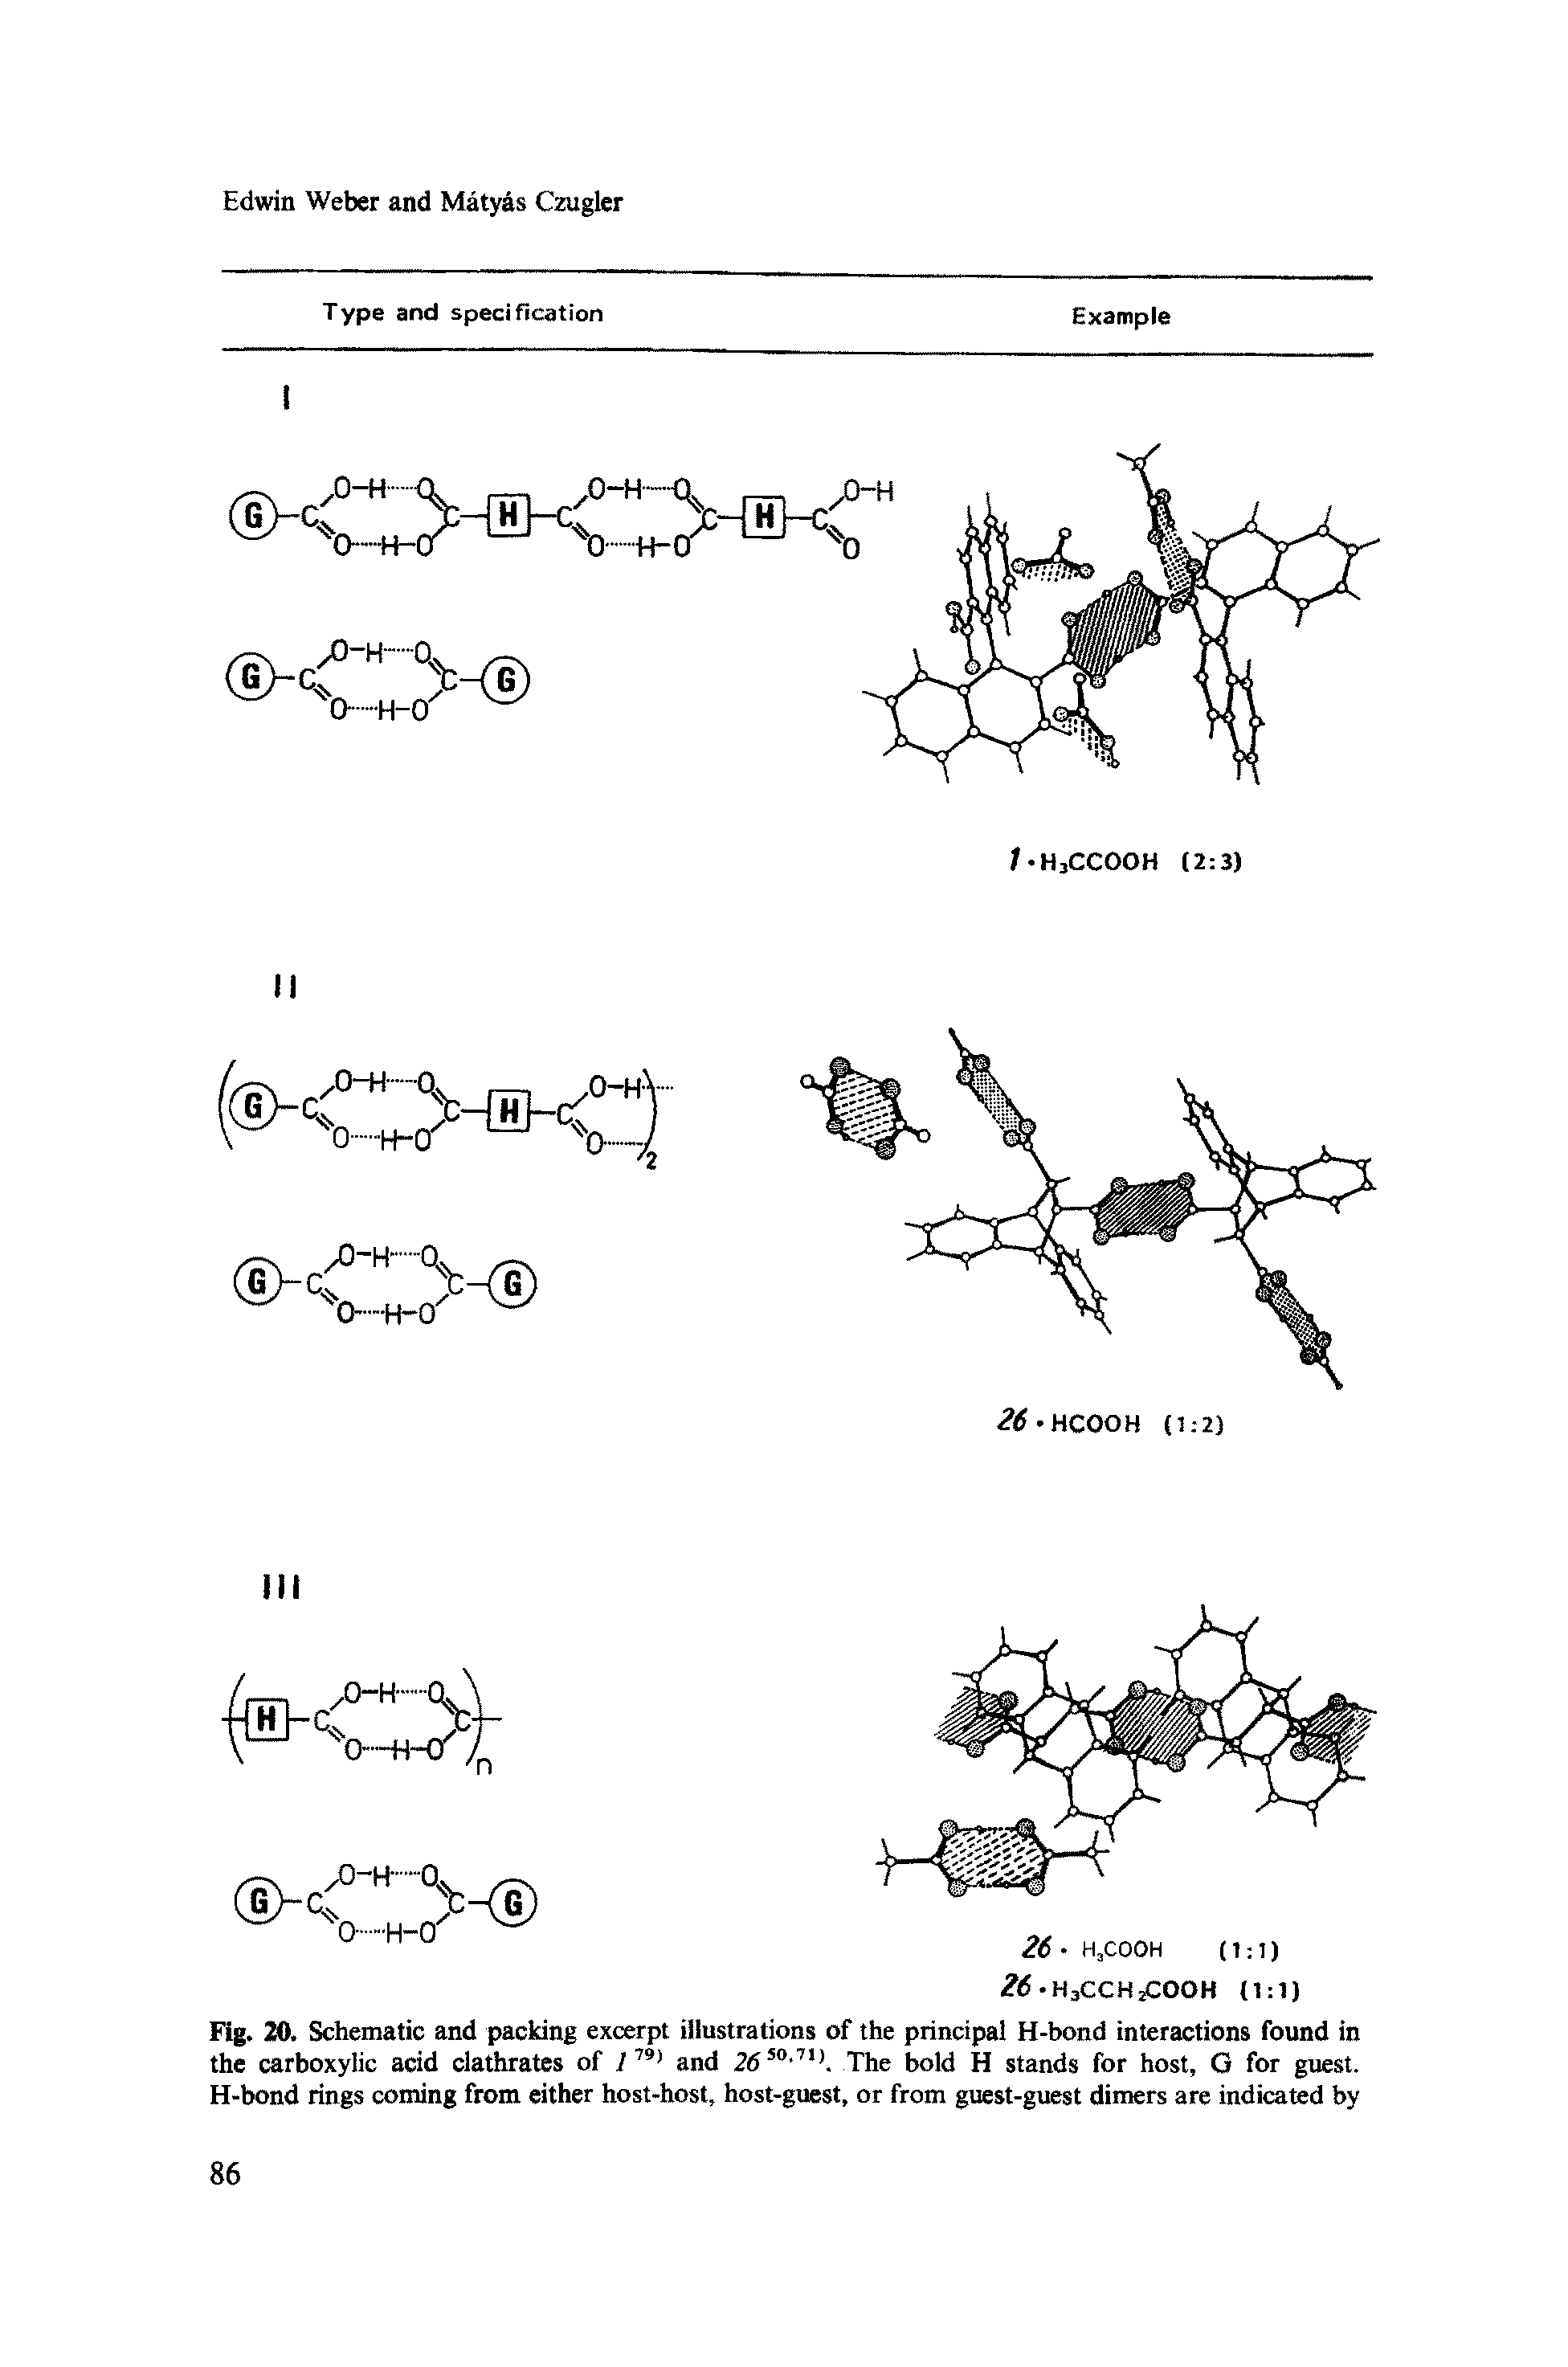 Fig. 20. Schematic and packing excerpt illustrations of the principal H-bond interactions found in the carboxylic acid clathrates of 179) and 26 50-71>. The bold H stands for host, G for guest. H-bond rings coming from either host-host, host-guest, or from guest-guest dimers are indicated by...